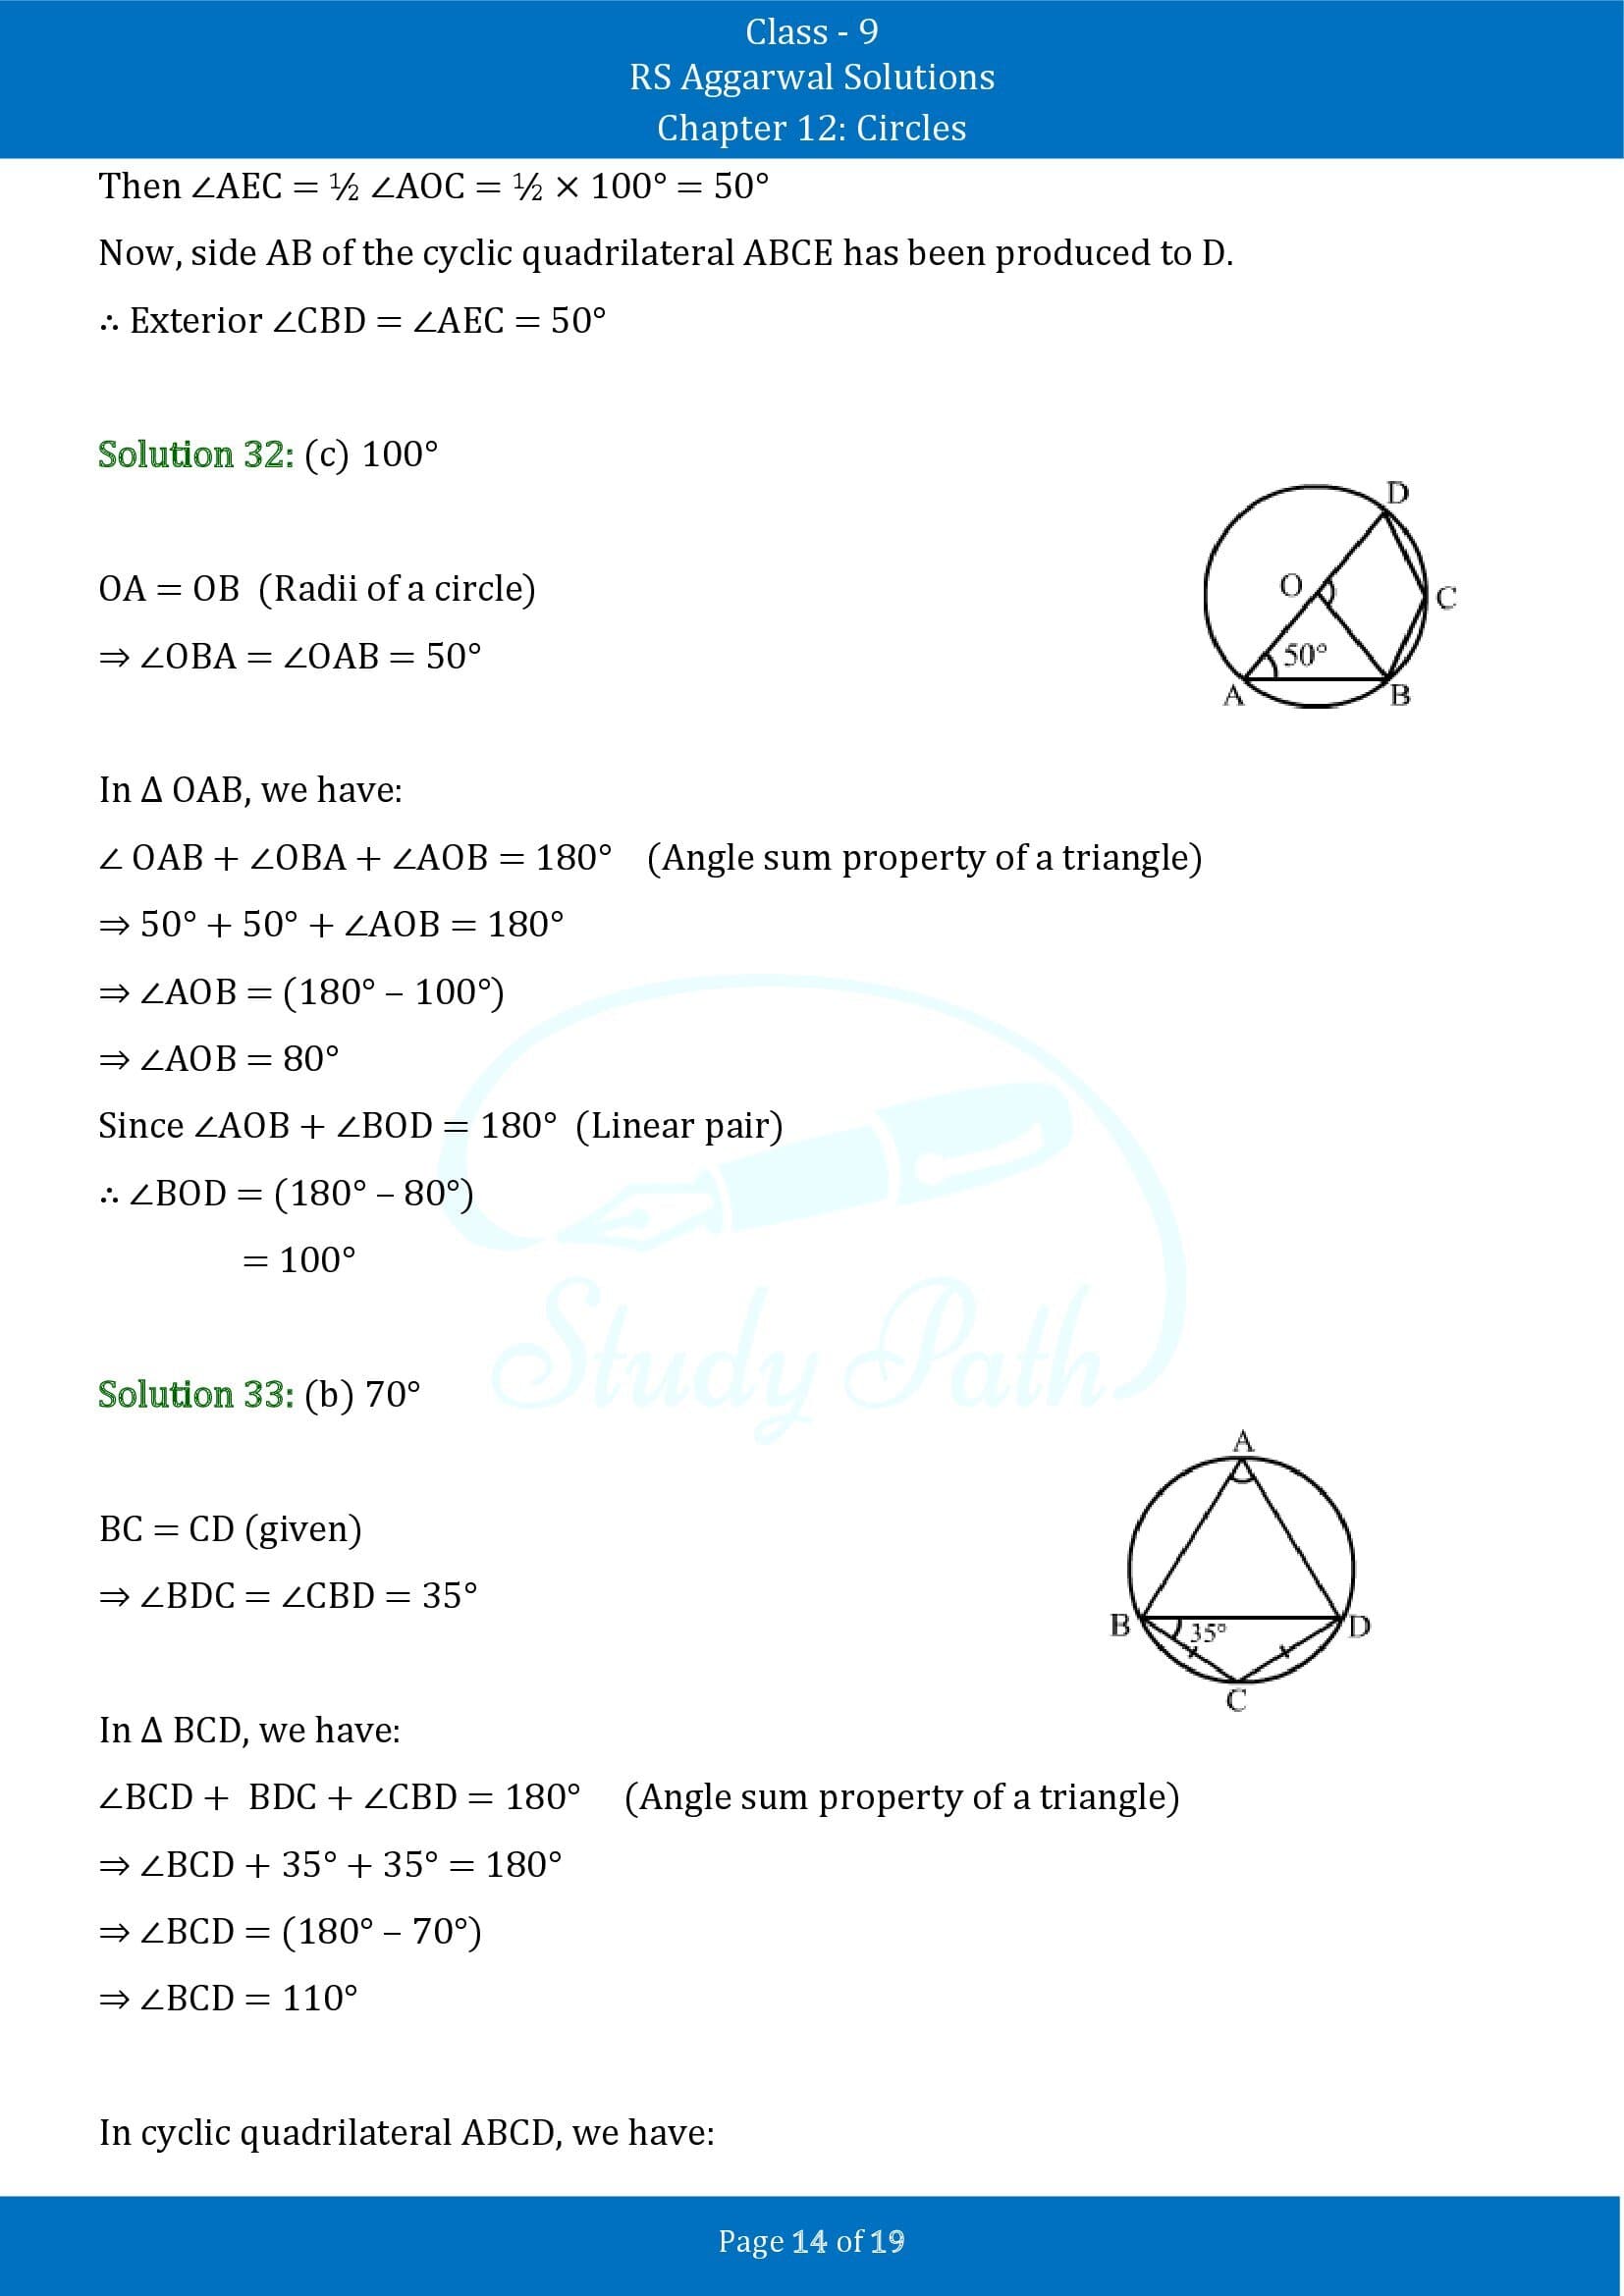 RS Aggarwal Solutions Class 9 Chapter 12 Circles Multiple Choice Questions MCQs 00014